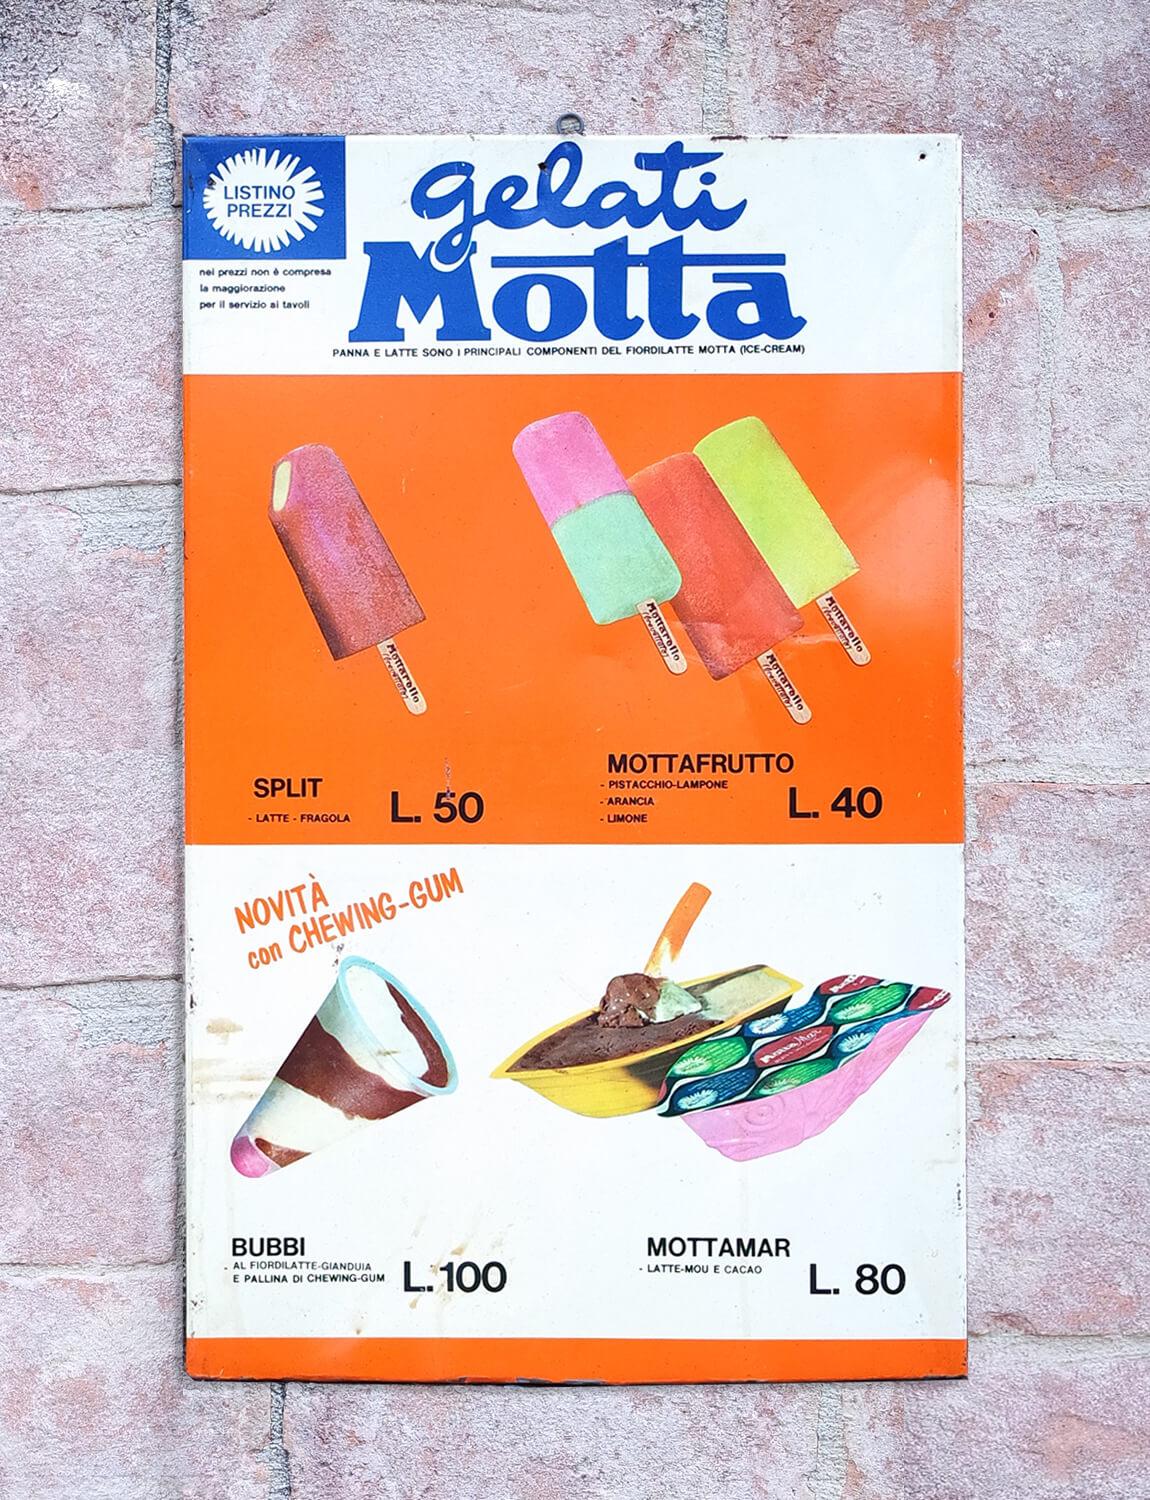 Original 1960s Italian Motta Gelato sign found in storage in an old palazzo in Amelia, Umbria. This completely iconic sign displays Italian ice-cream from the 1960s and 1970s. It was common to see these signs on the beach or outside Italian cafes.